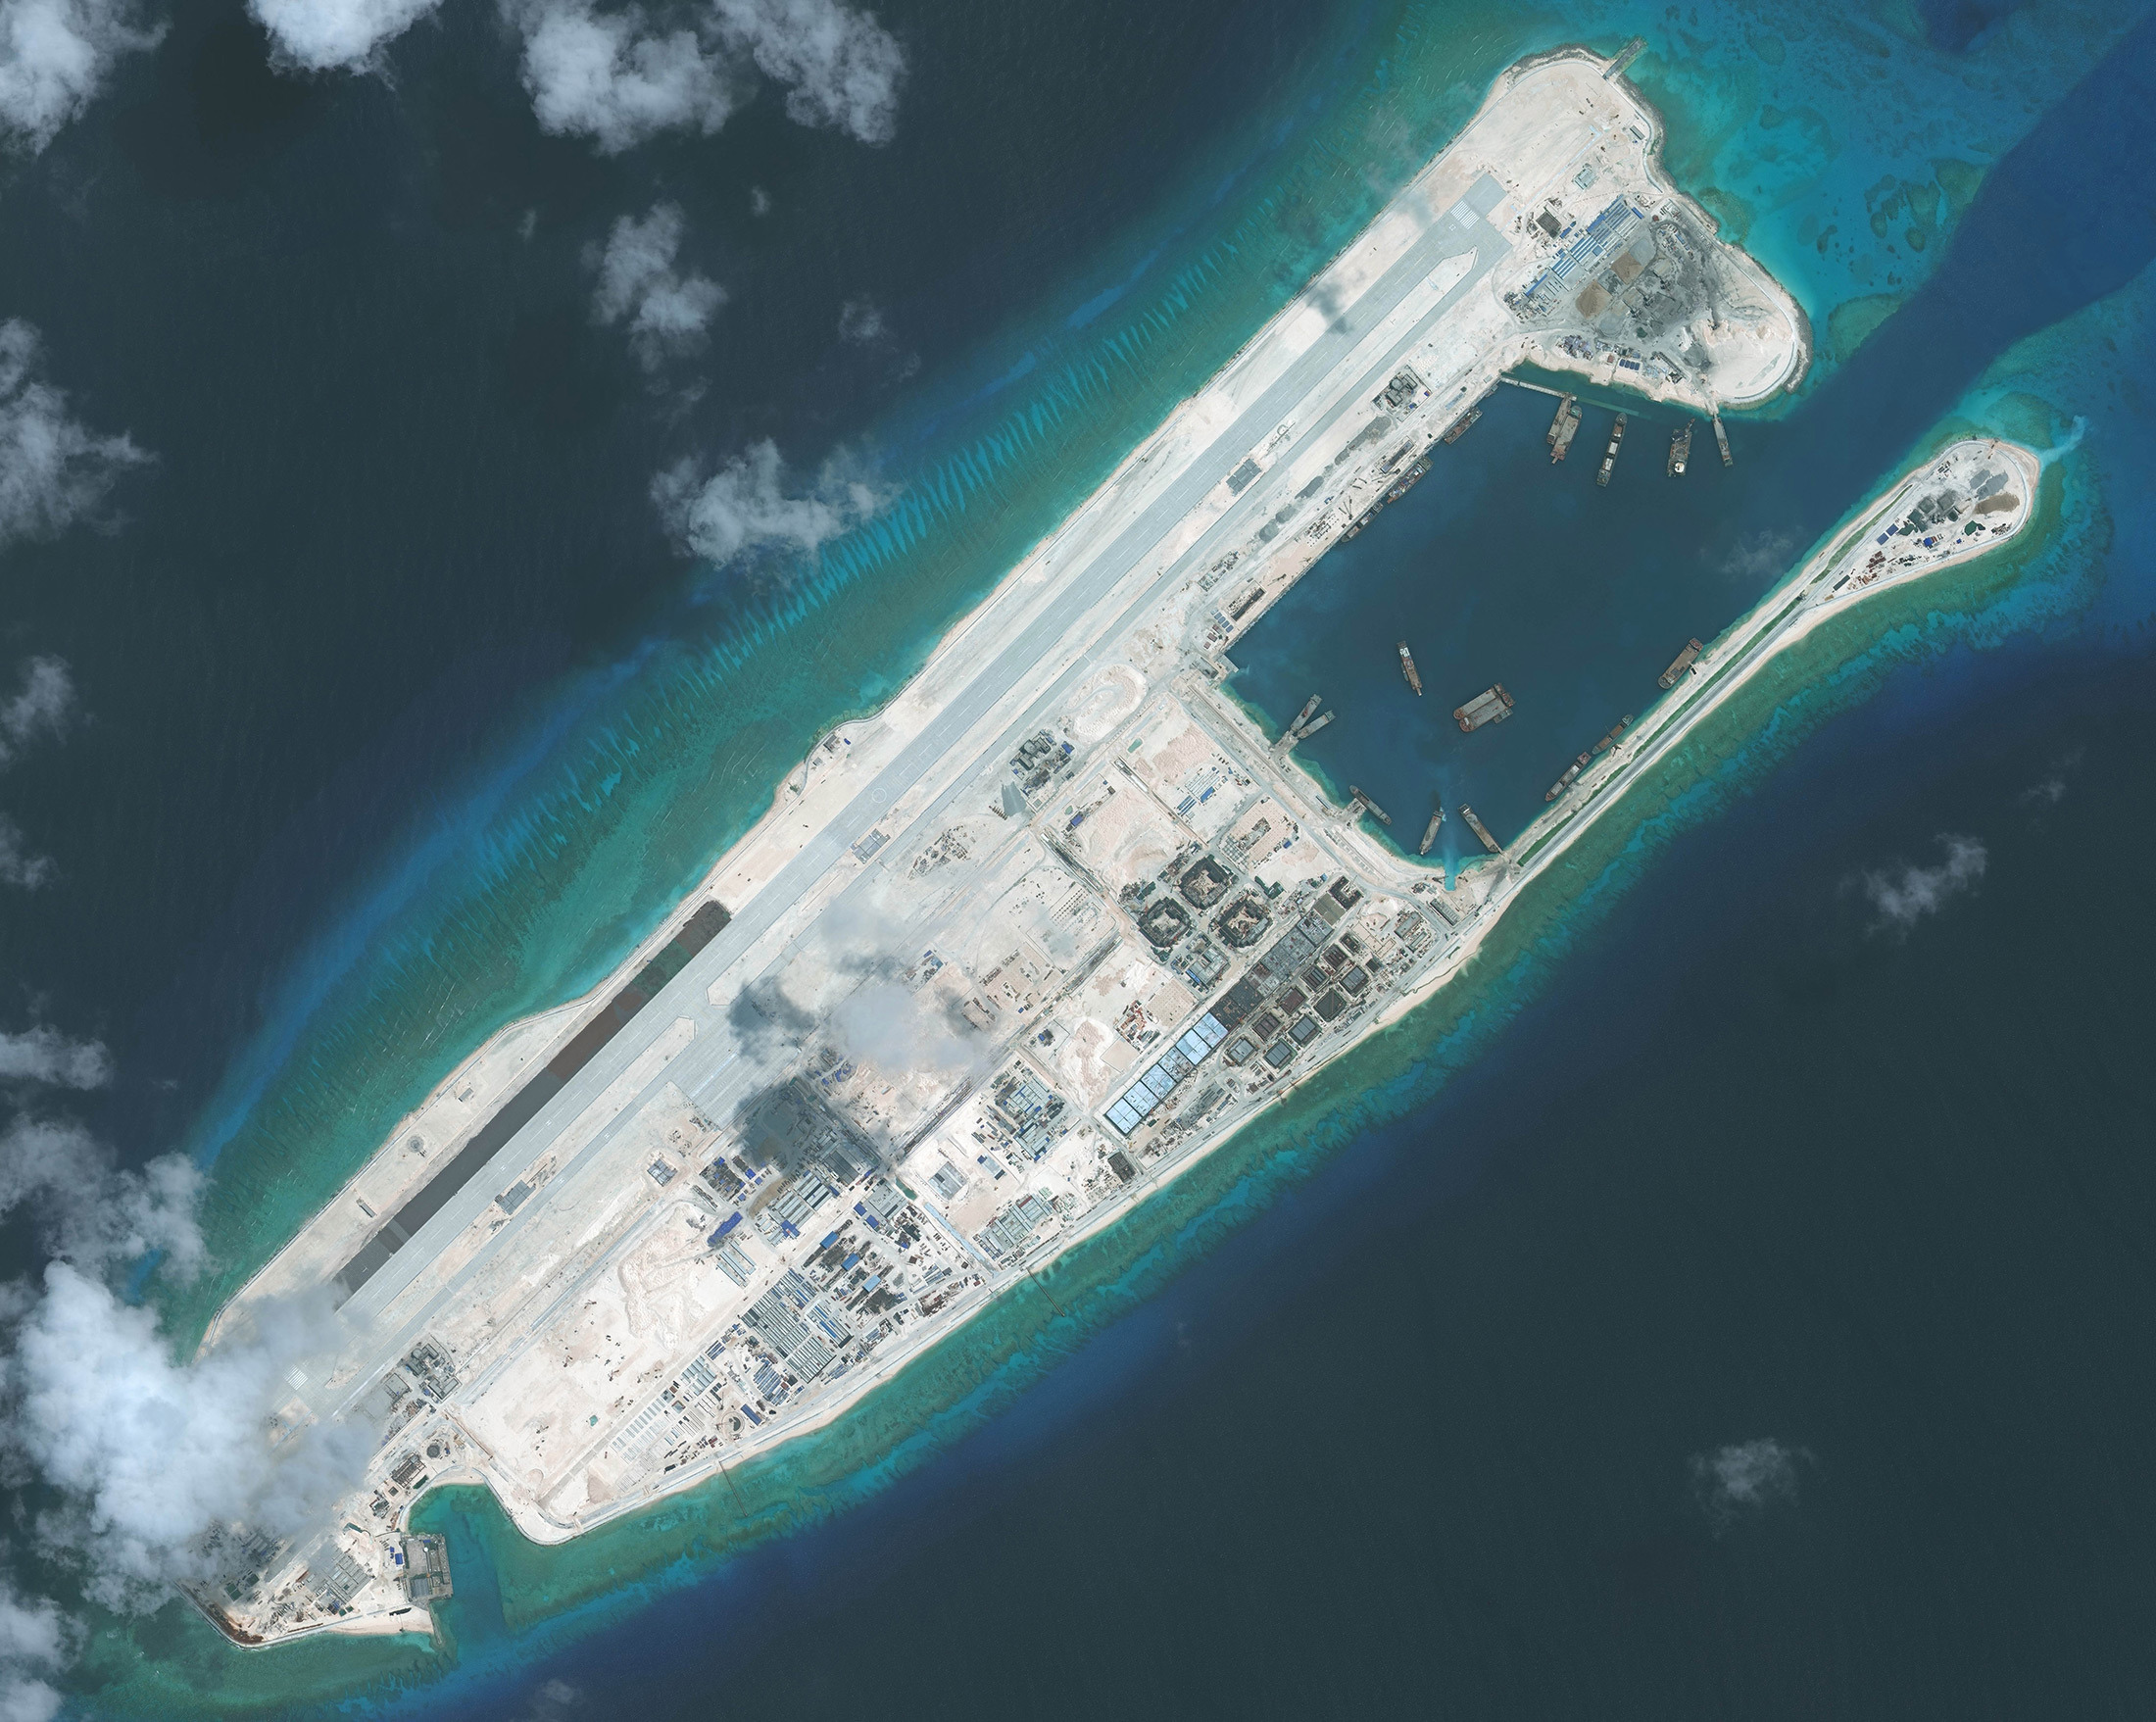 U.S. warship challenges China's claims in South China Sea